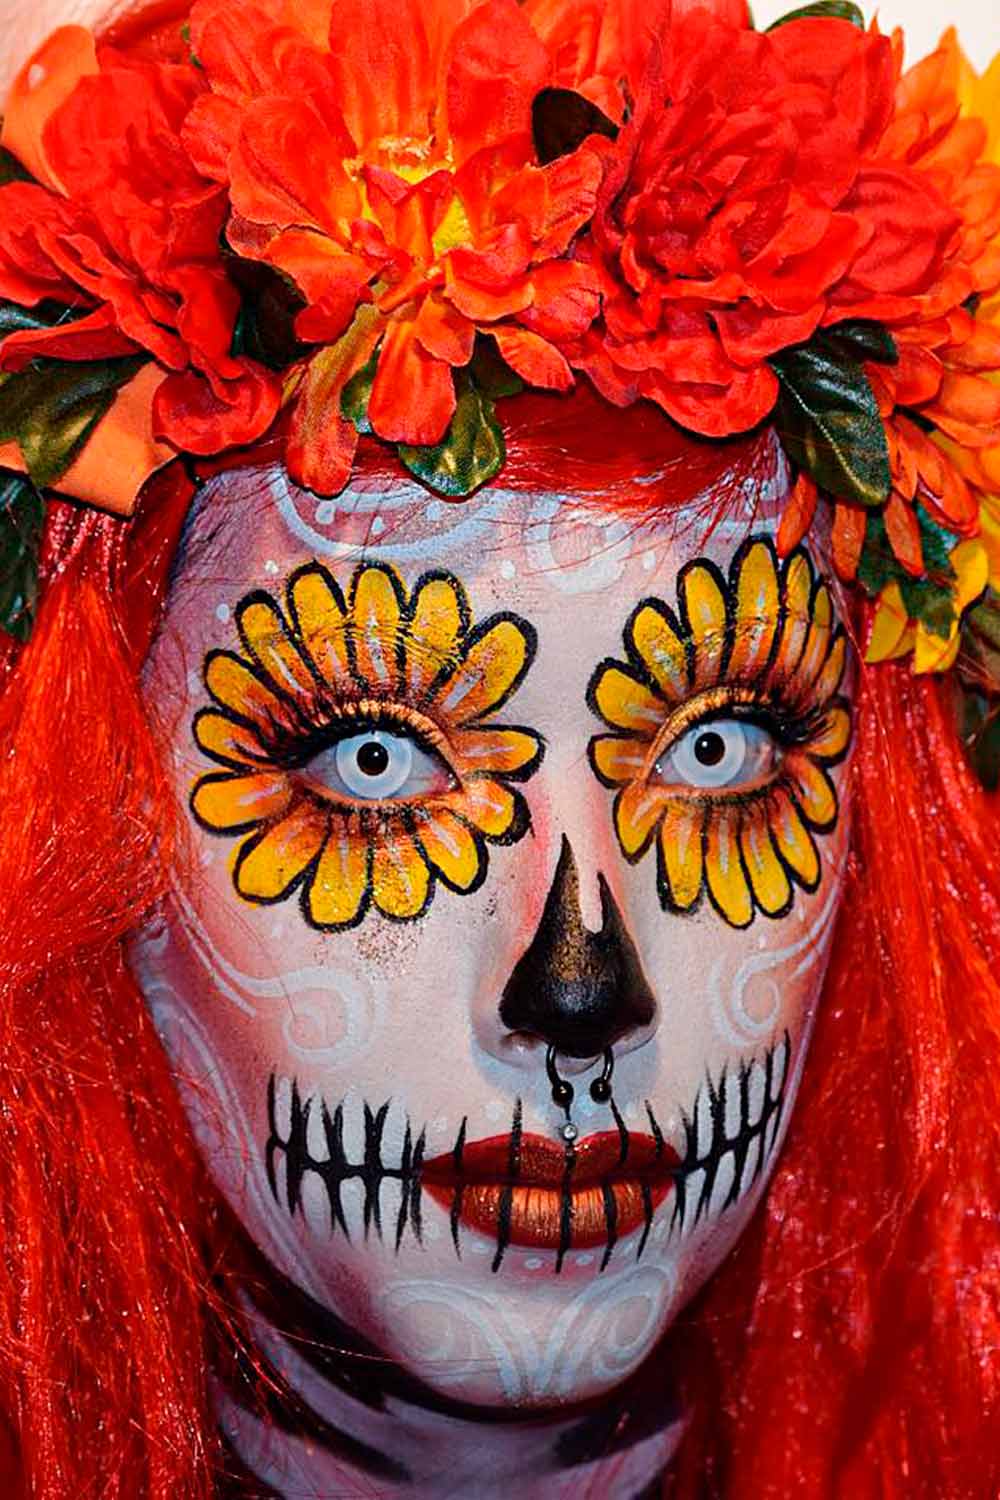 Skull Makeup Ideas with Floral Accessories